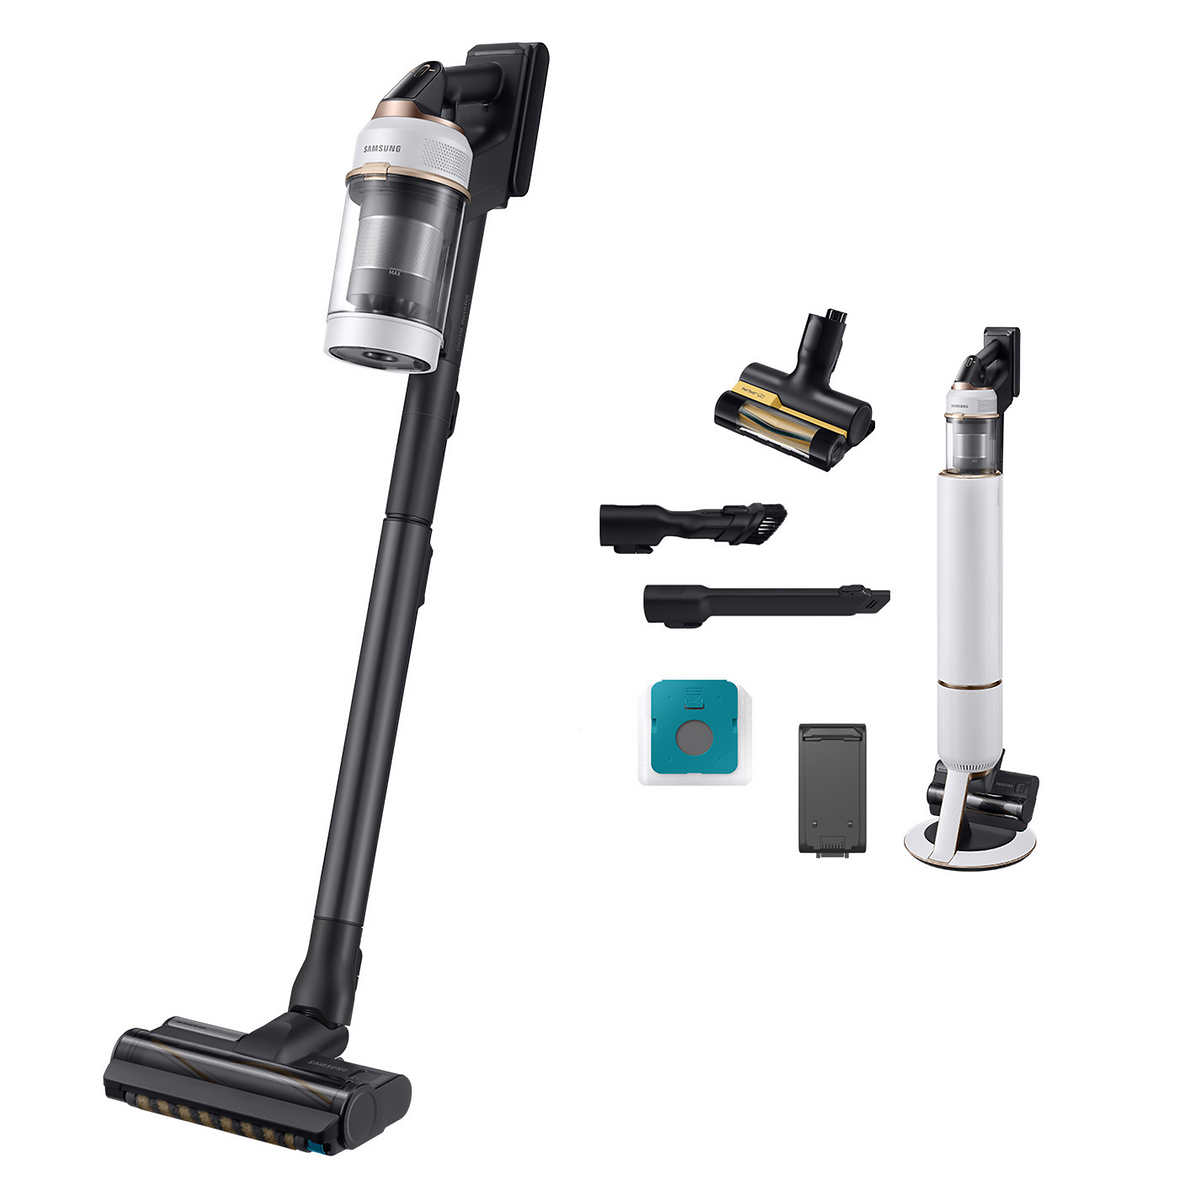 Samsung Bespoke Jet Pet Cordless Stick Vac with Self-Empty All-in-One Clean Station